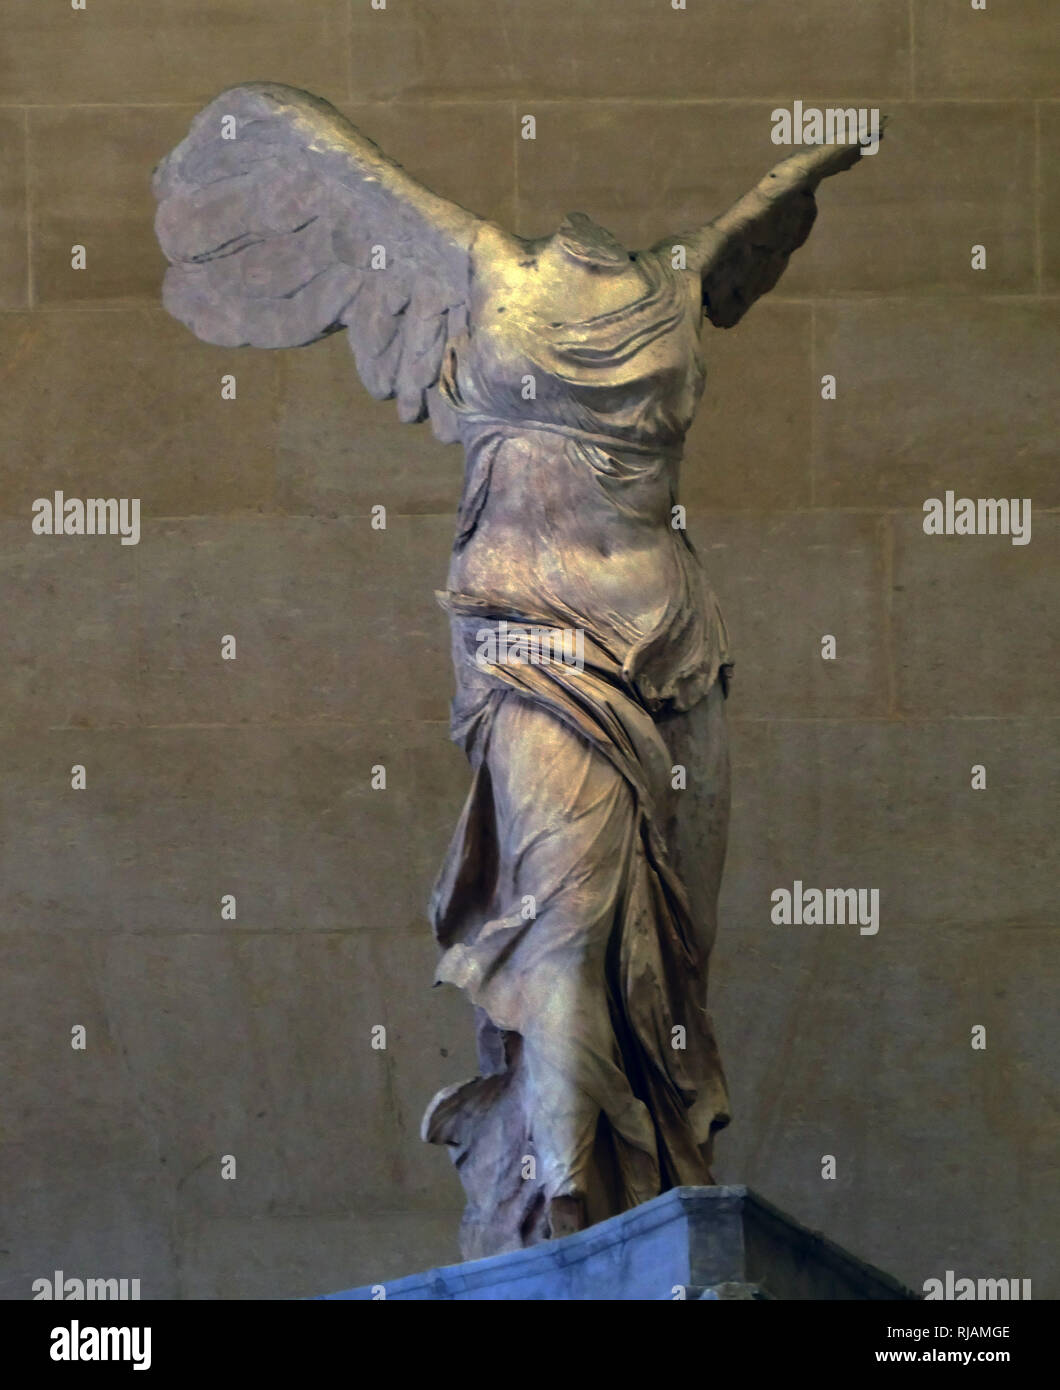 The Winged Victory of Samothrace, also called the Nike of Samothrace, is a  marble Hellenistic sculpture